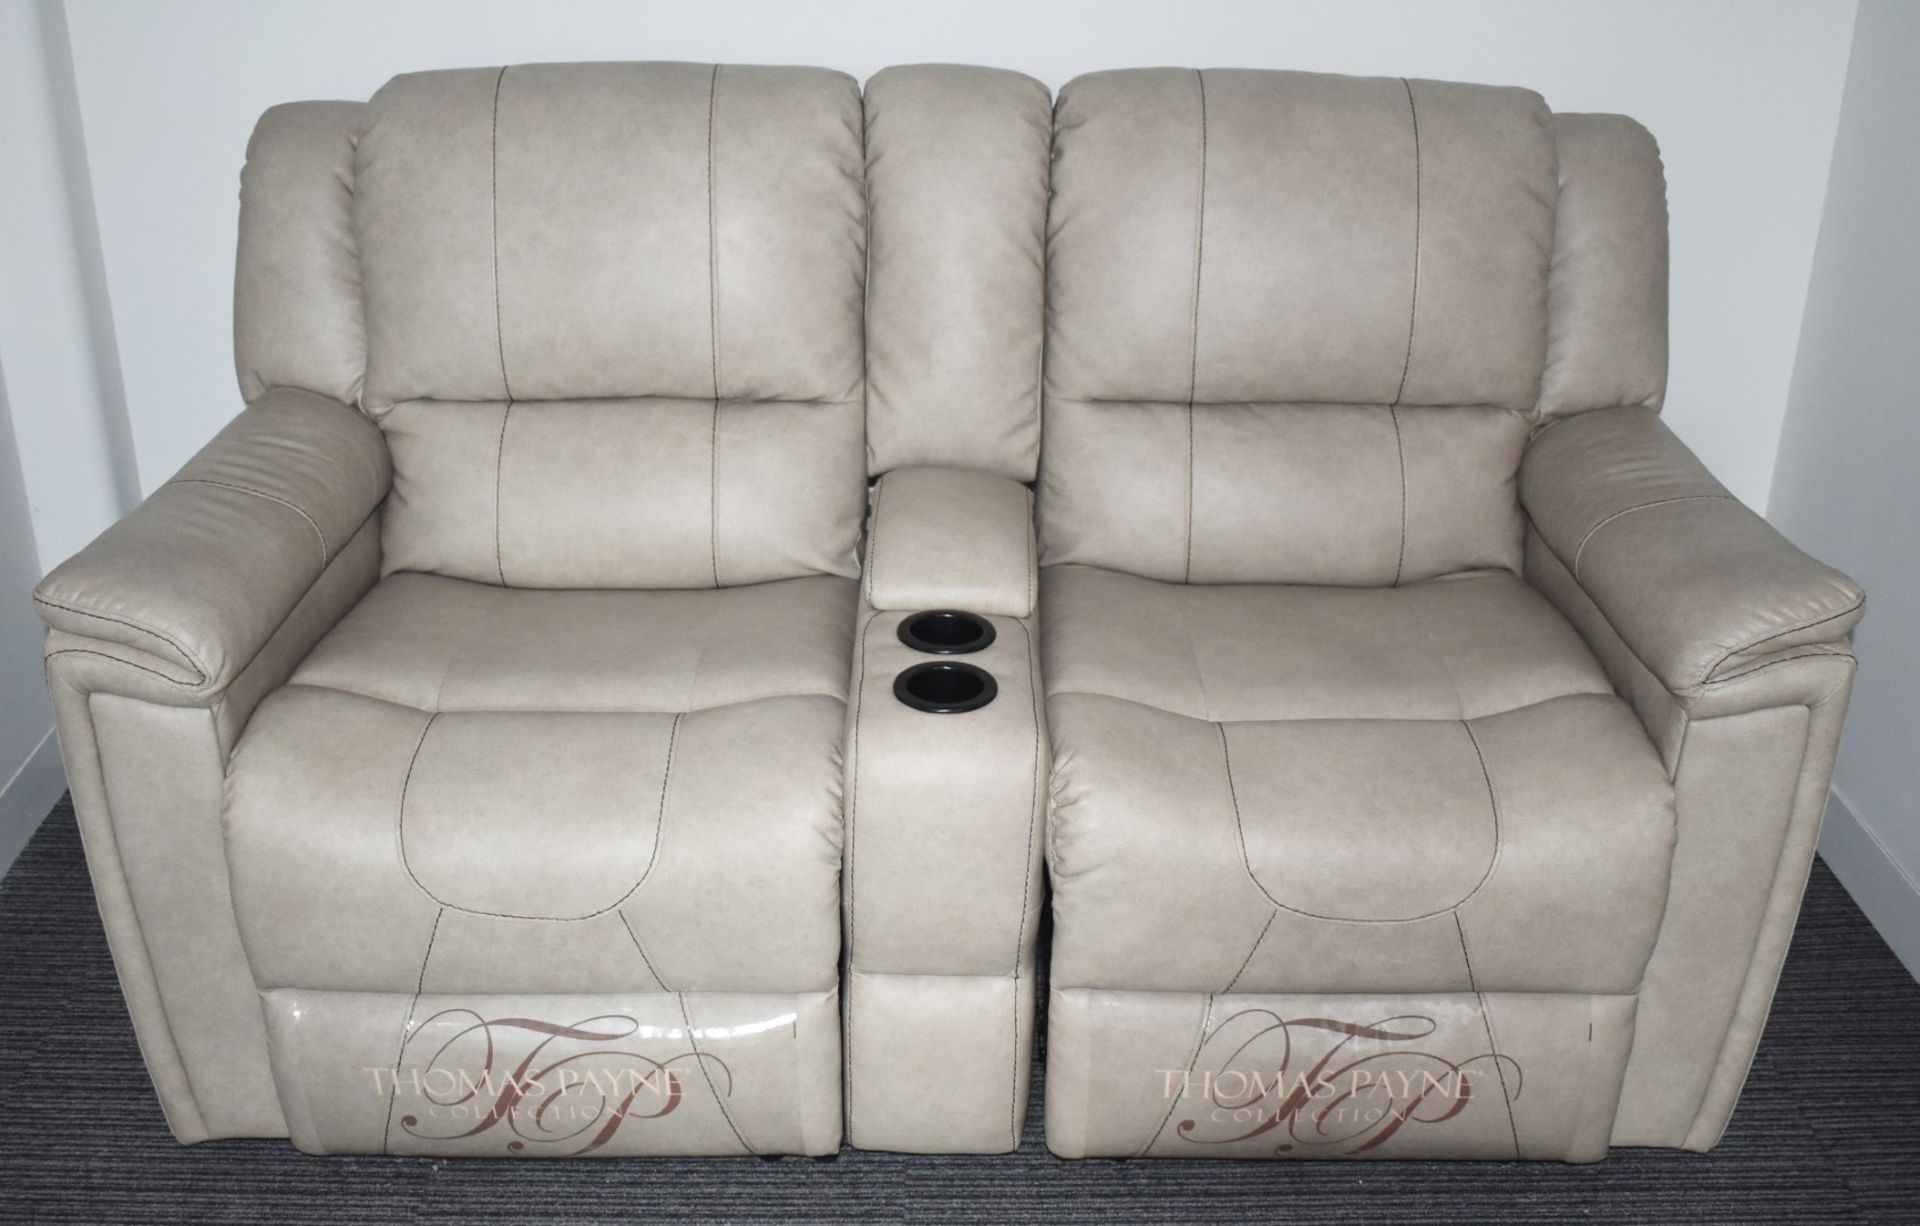 1 x Thomas Payne Reclining Wallhugger Theater Seating Love Seat Couch With Center Console and - Image 2 of 12